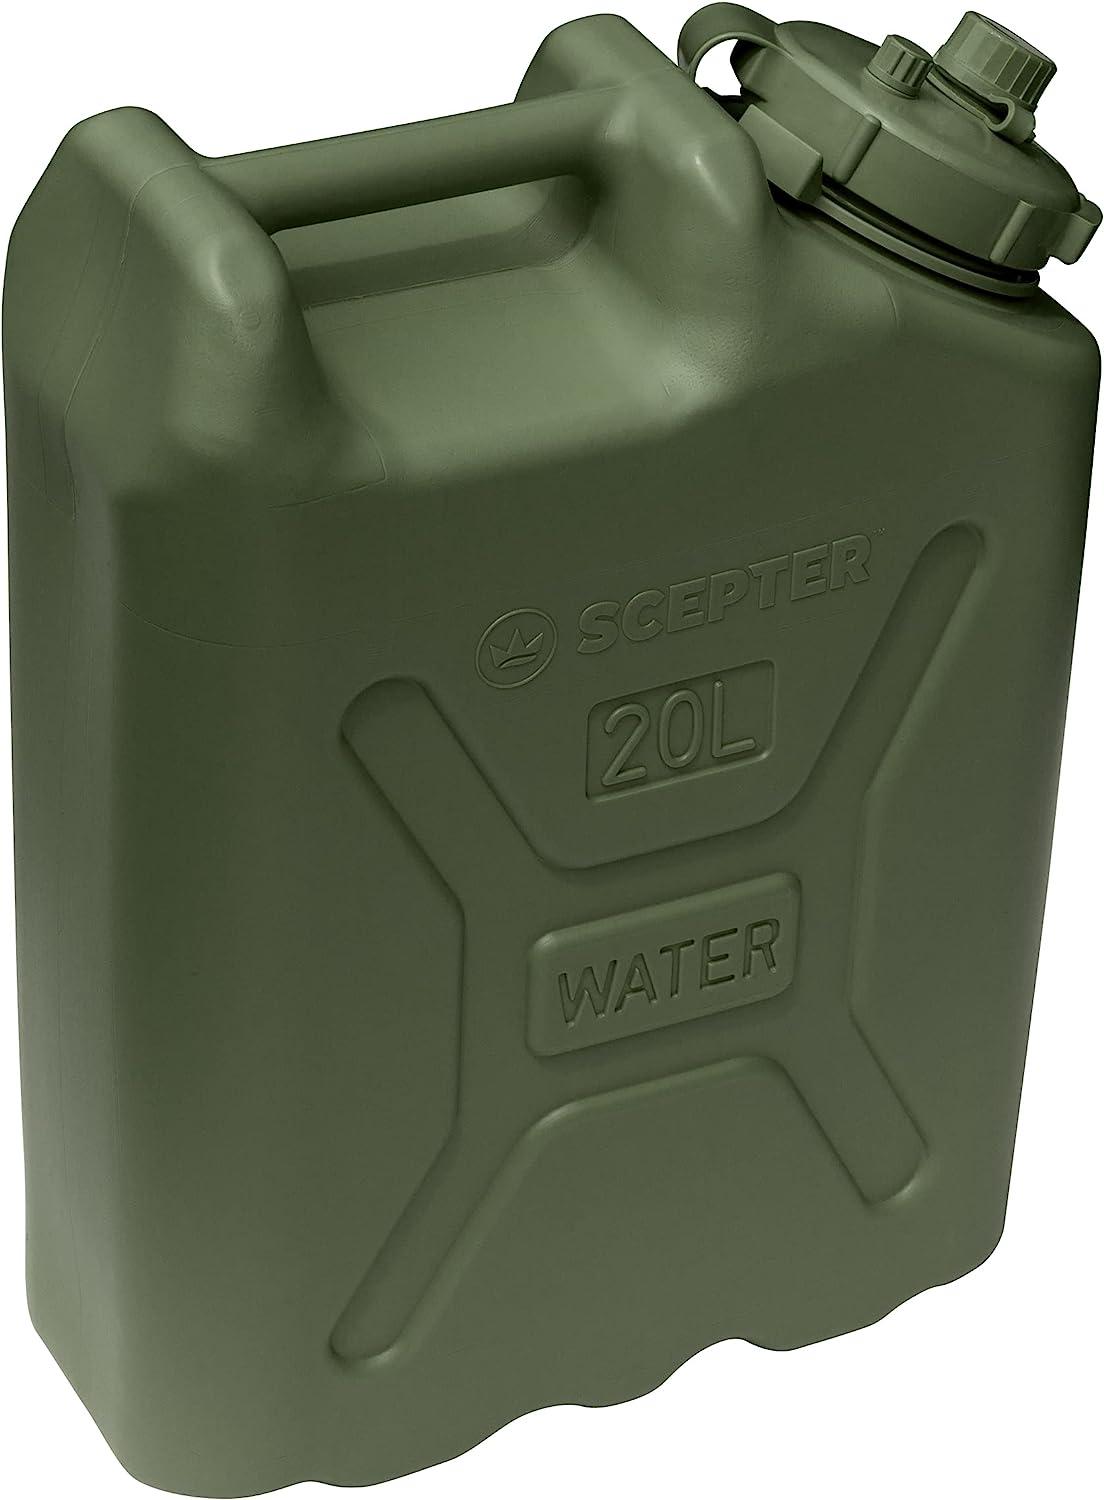 Scepter ECO Jerry Can  5 Gallon Military Jerry Can